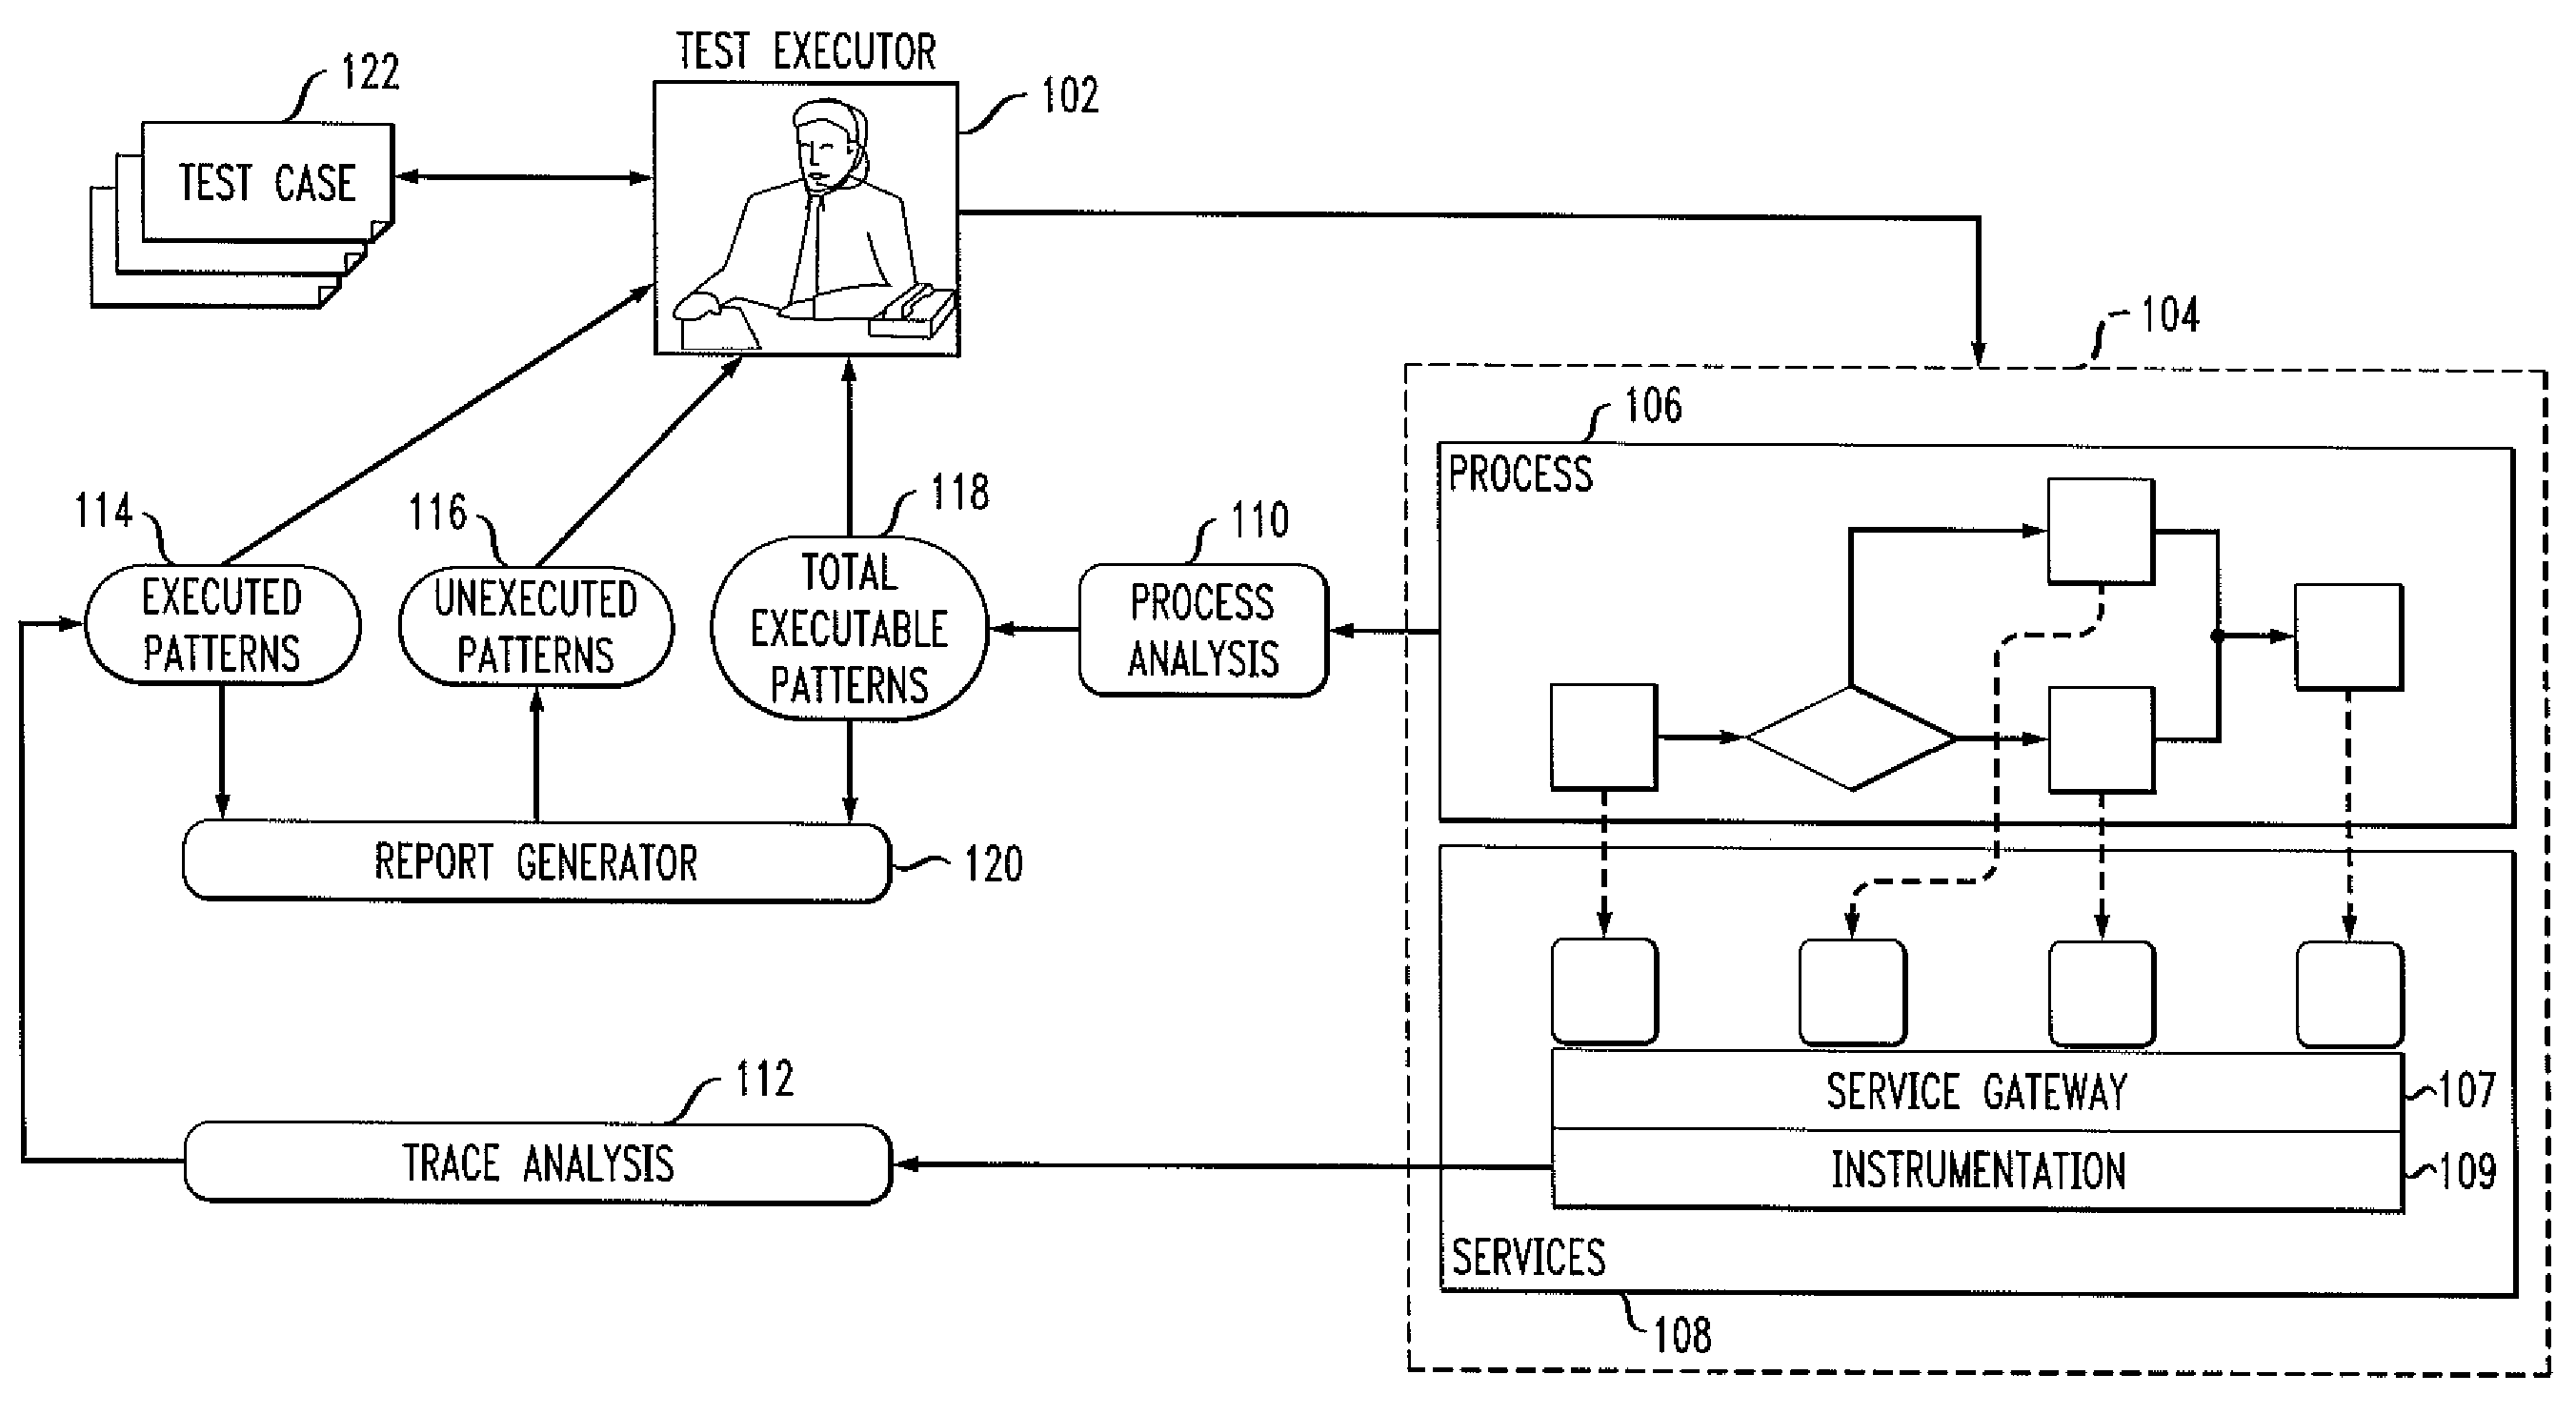 Method for Analyzing Transaction Traces to Enable Process Testing